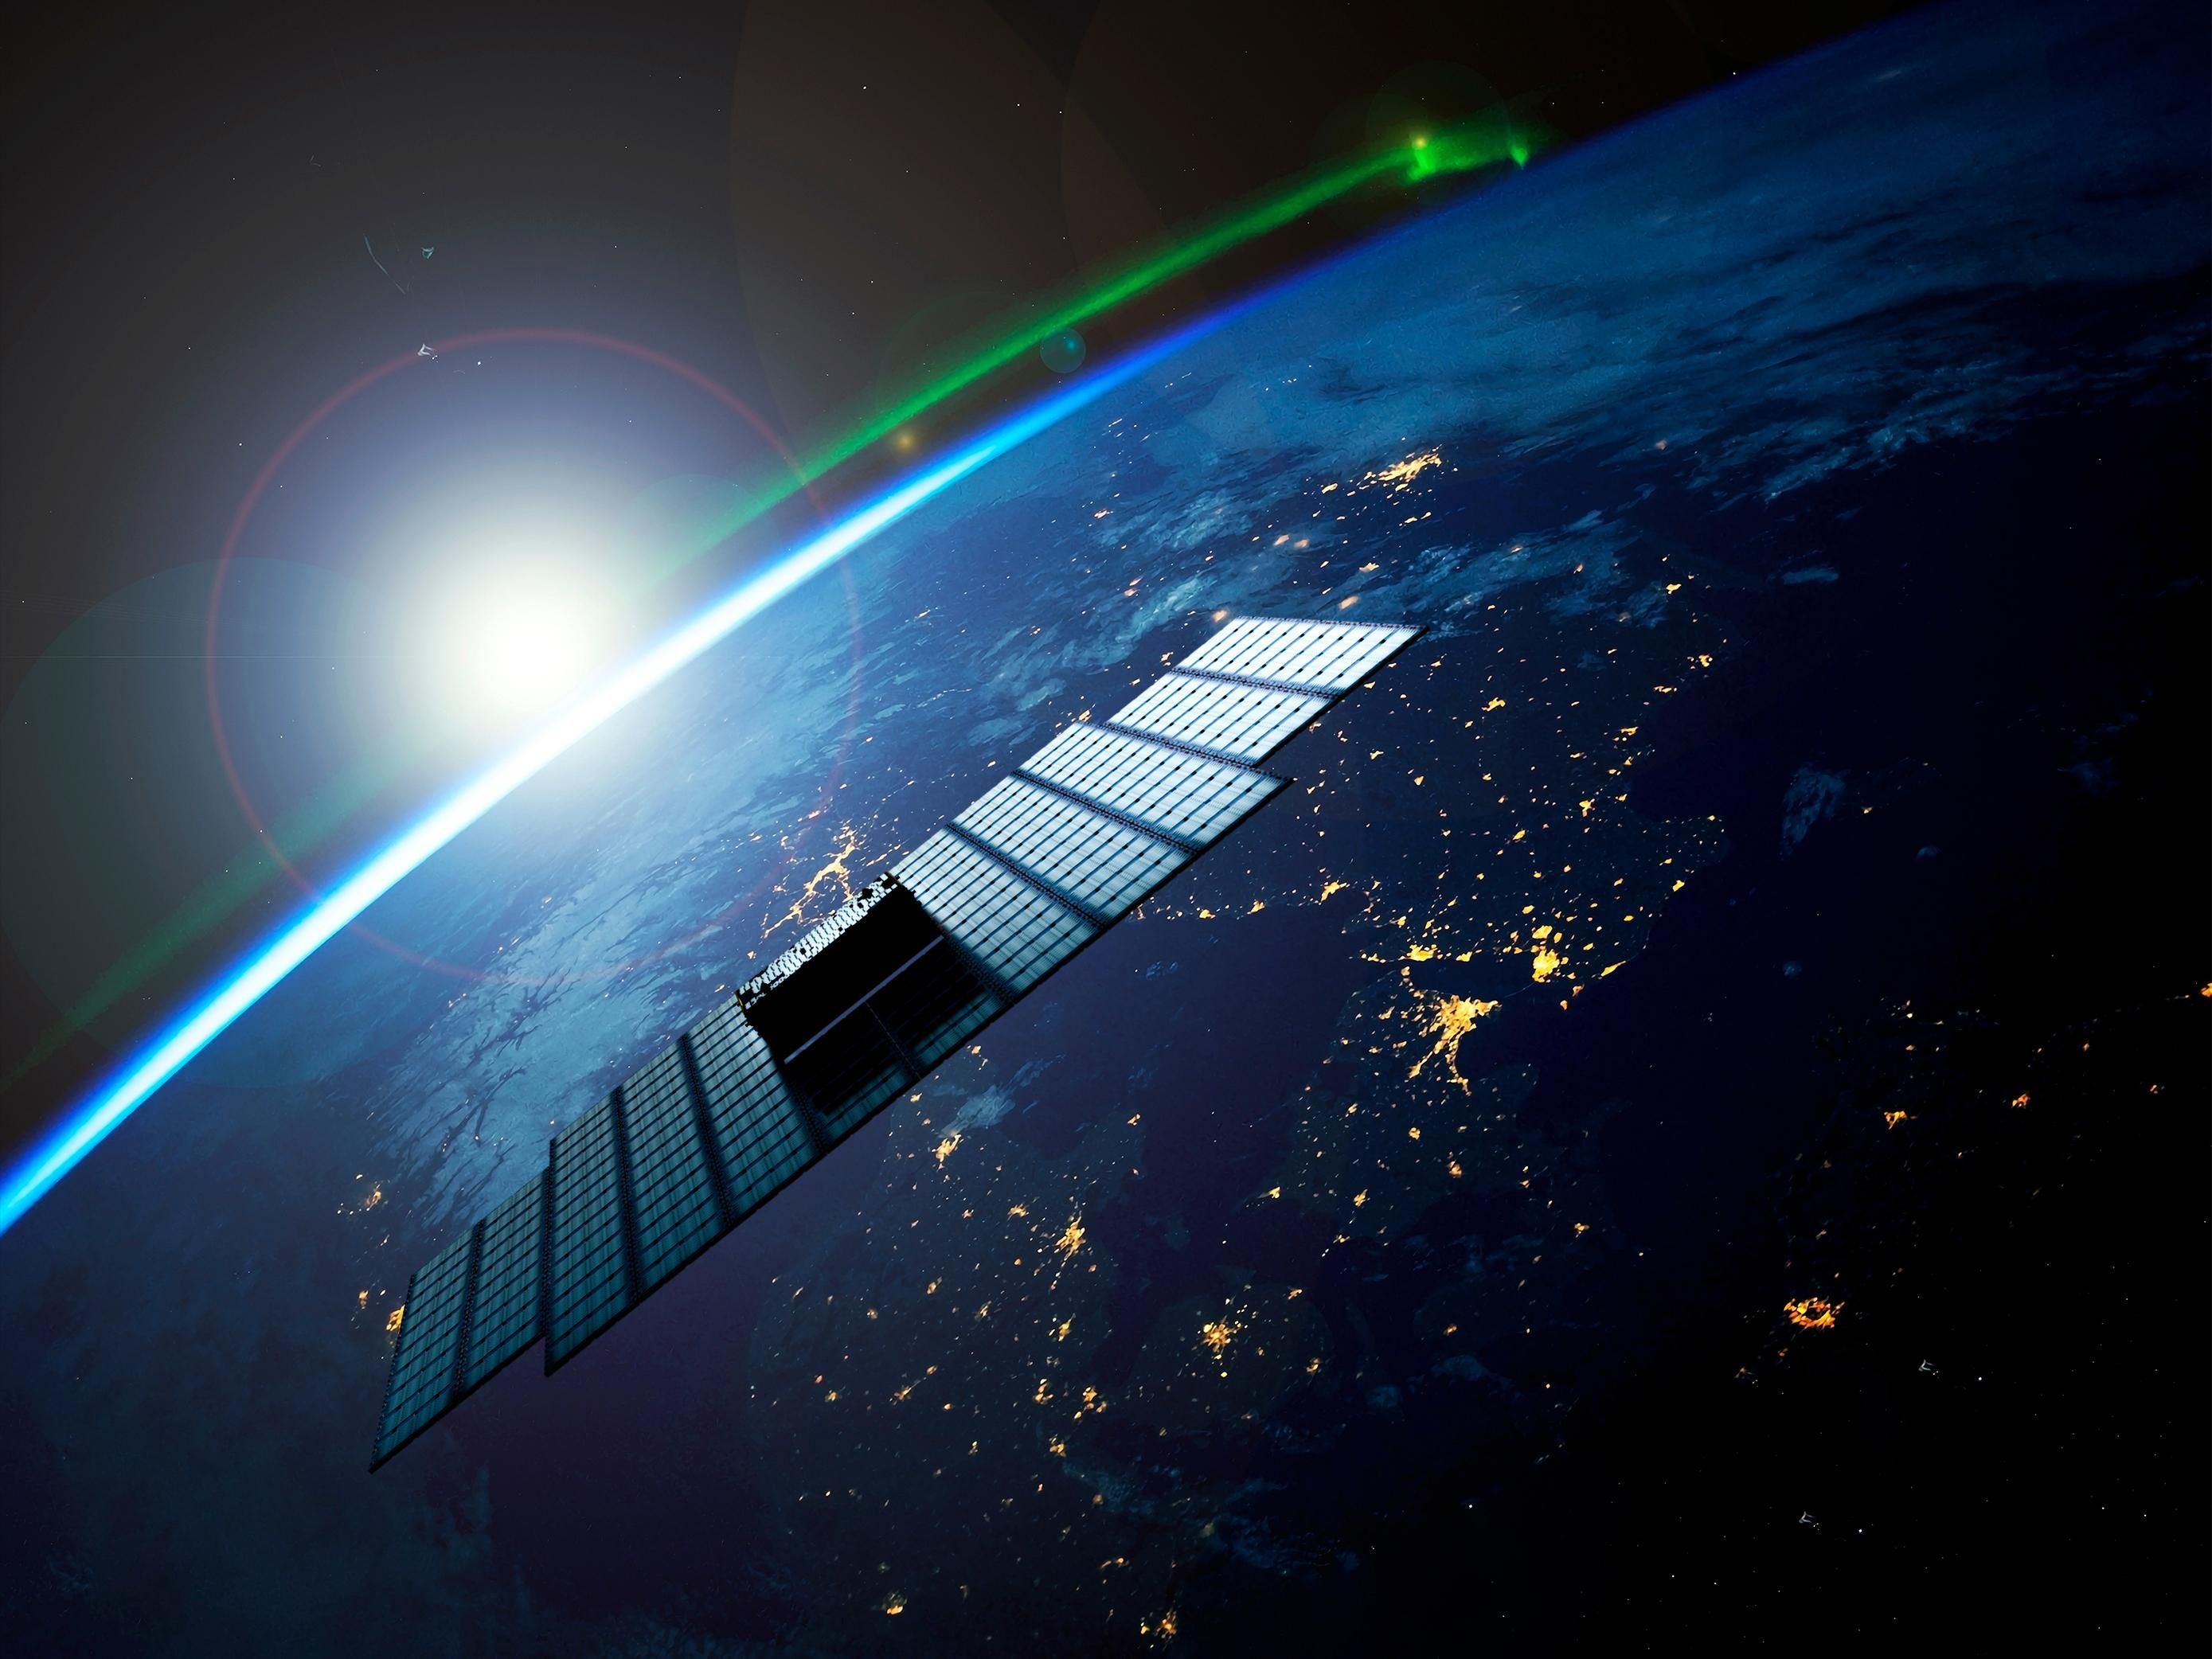 A 3D rendering of a large flat satellite orbiting the Earth, with the sun rising over the horizon behind it.